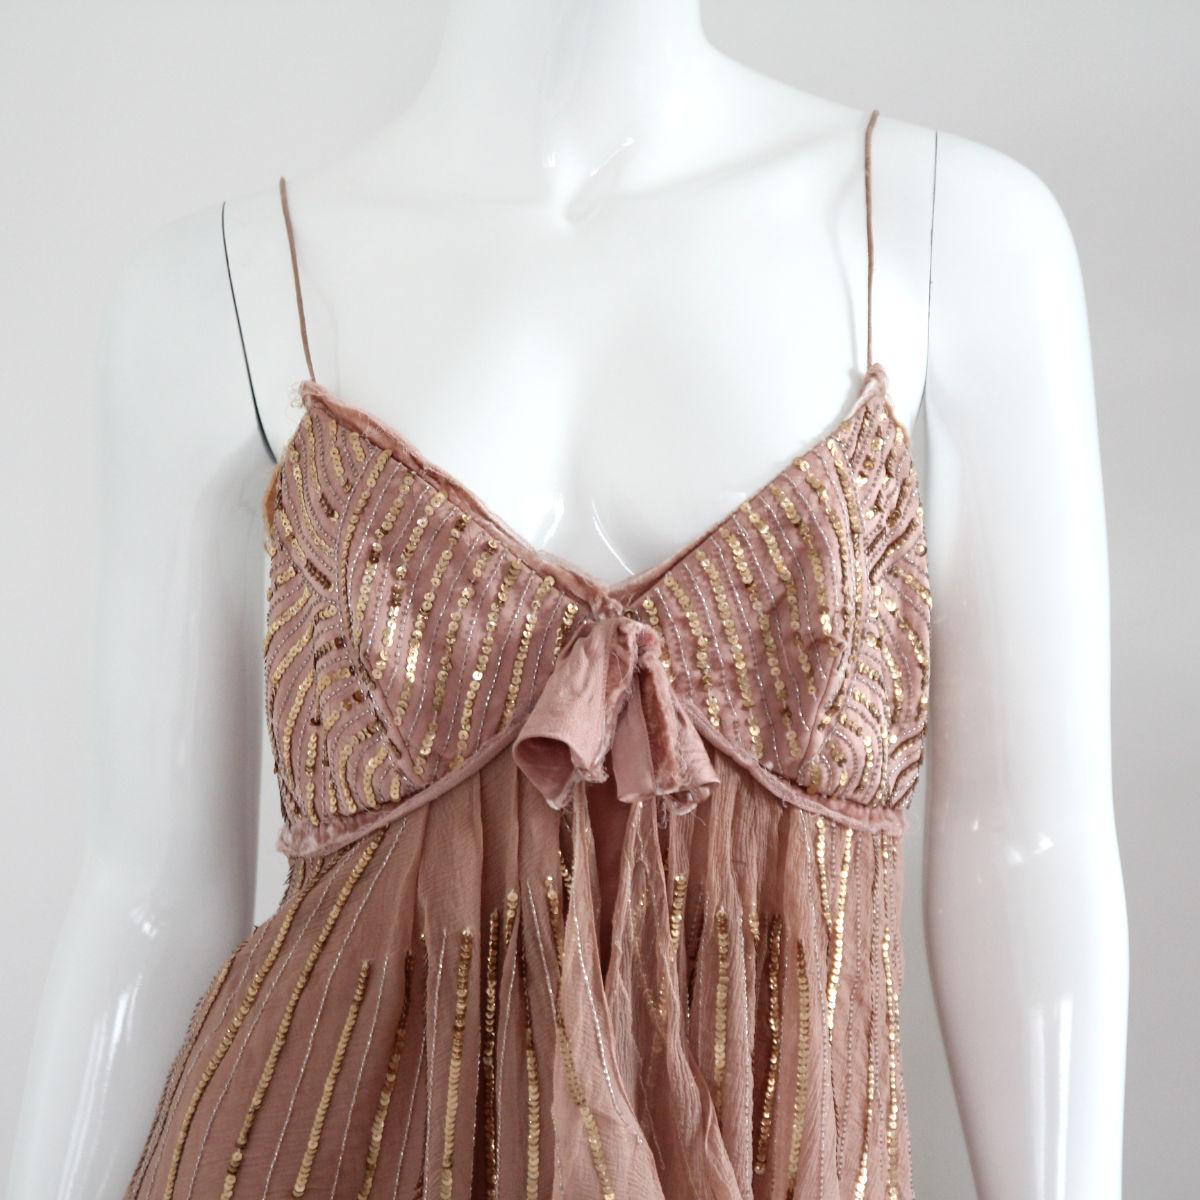 CHRISTIAN DIOR

2005. Old rose color dress with gold sequins from Christian Dior by John Galliano.

The elegant dress is an extremely rare collector's item.
Buy Now Or Cry Later! 

Get the incomparable Dior look of the Galliano era. 

The dress is